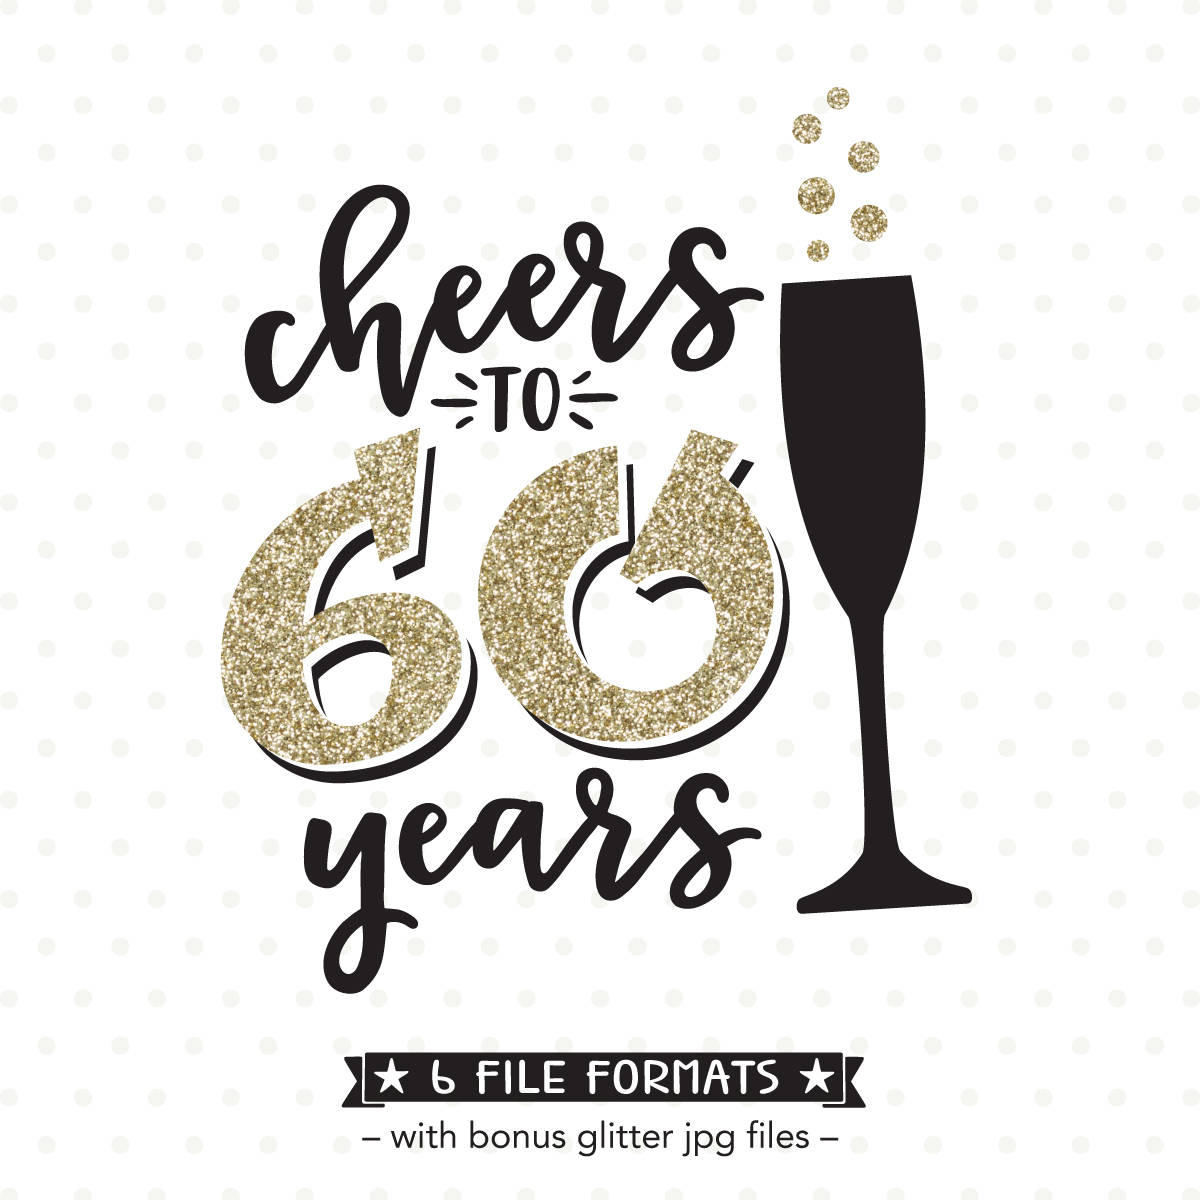 Download 60th Birthday SVG, Cheers to 60 Years SVG file, 60th ...